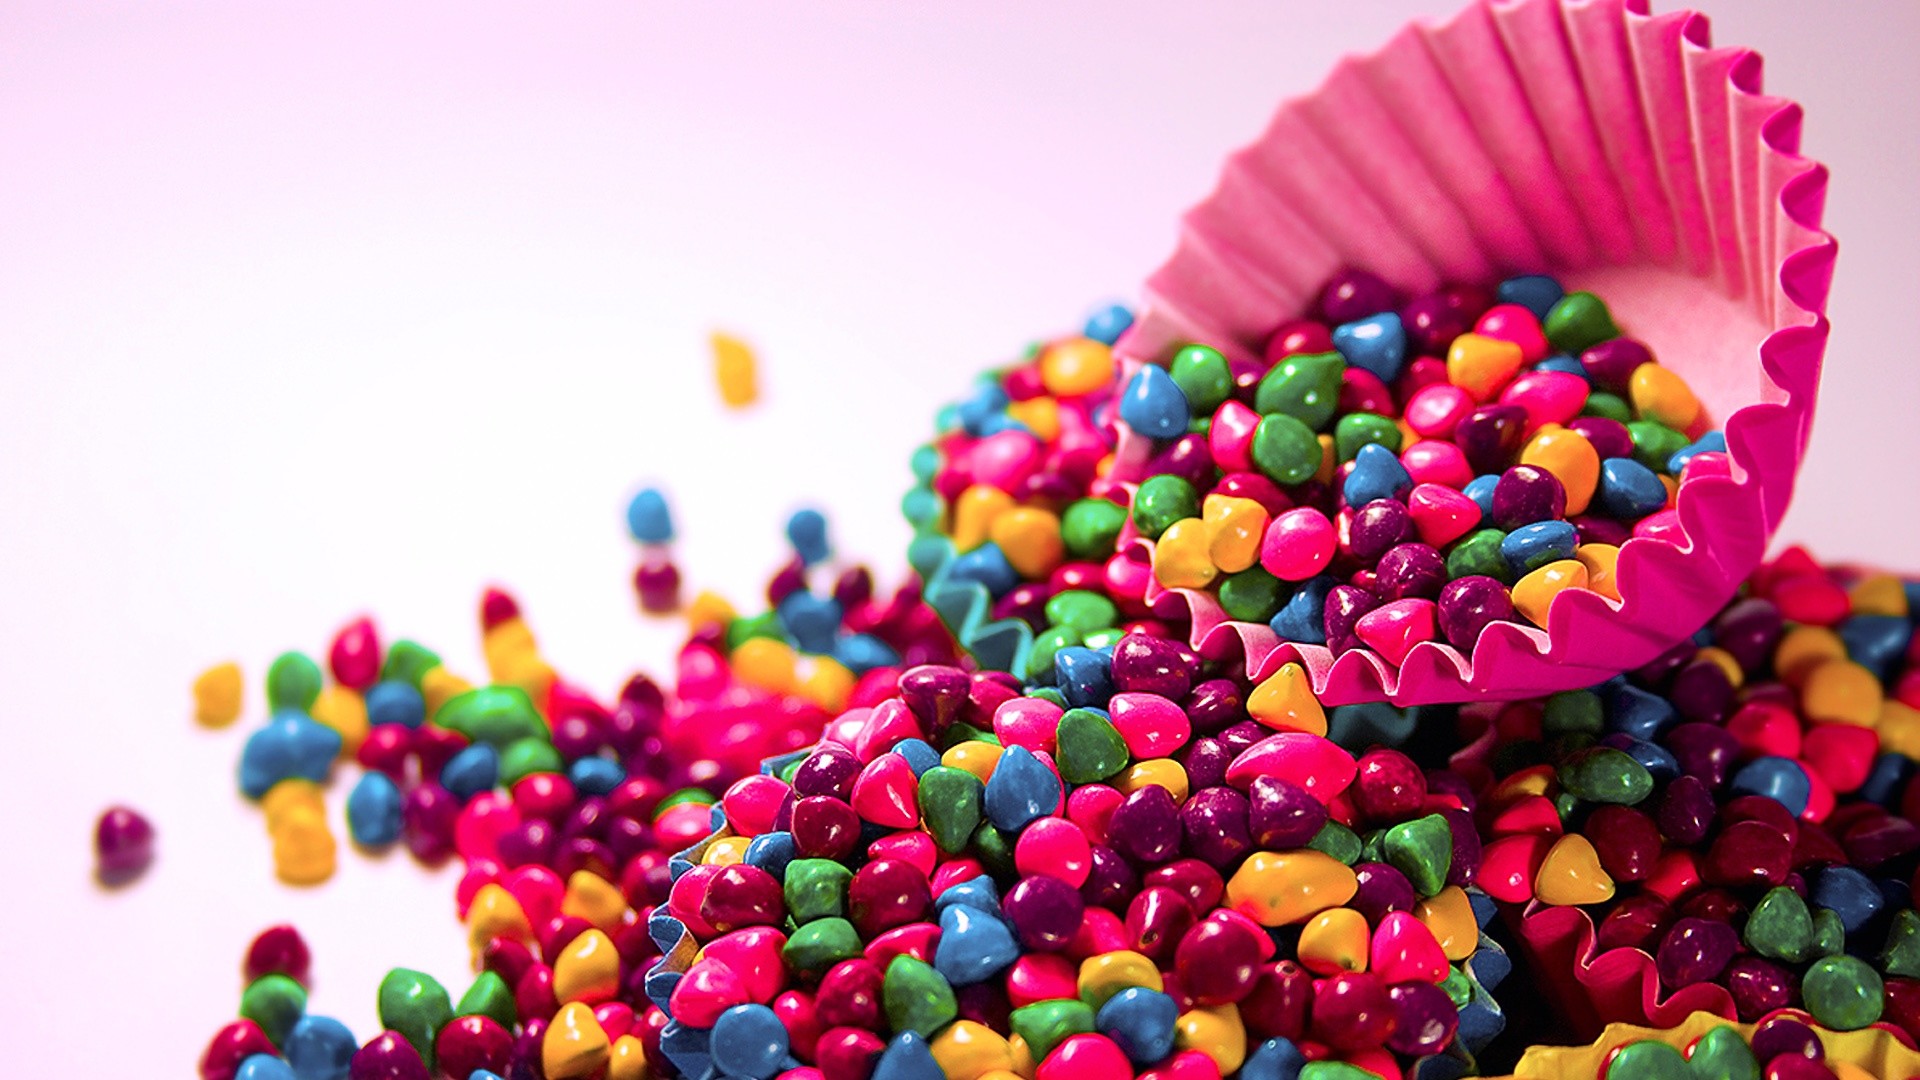 1920x1080 candy background wallpaper Candy Wallpapers Best Wallpapers